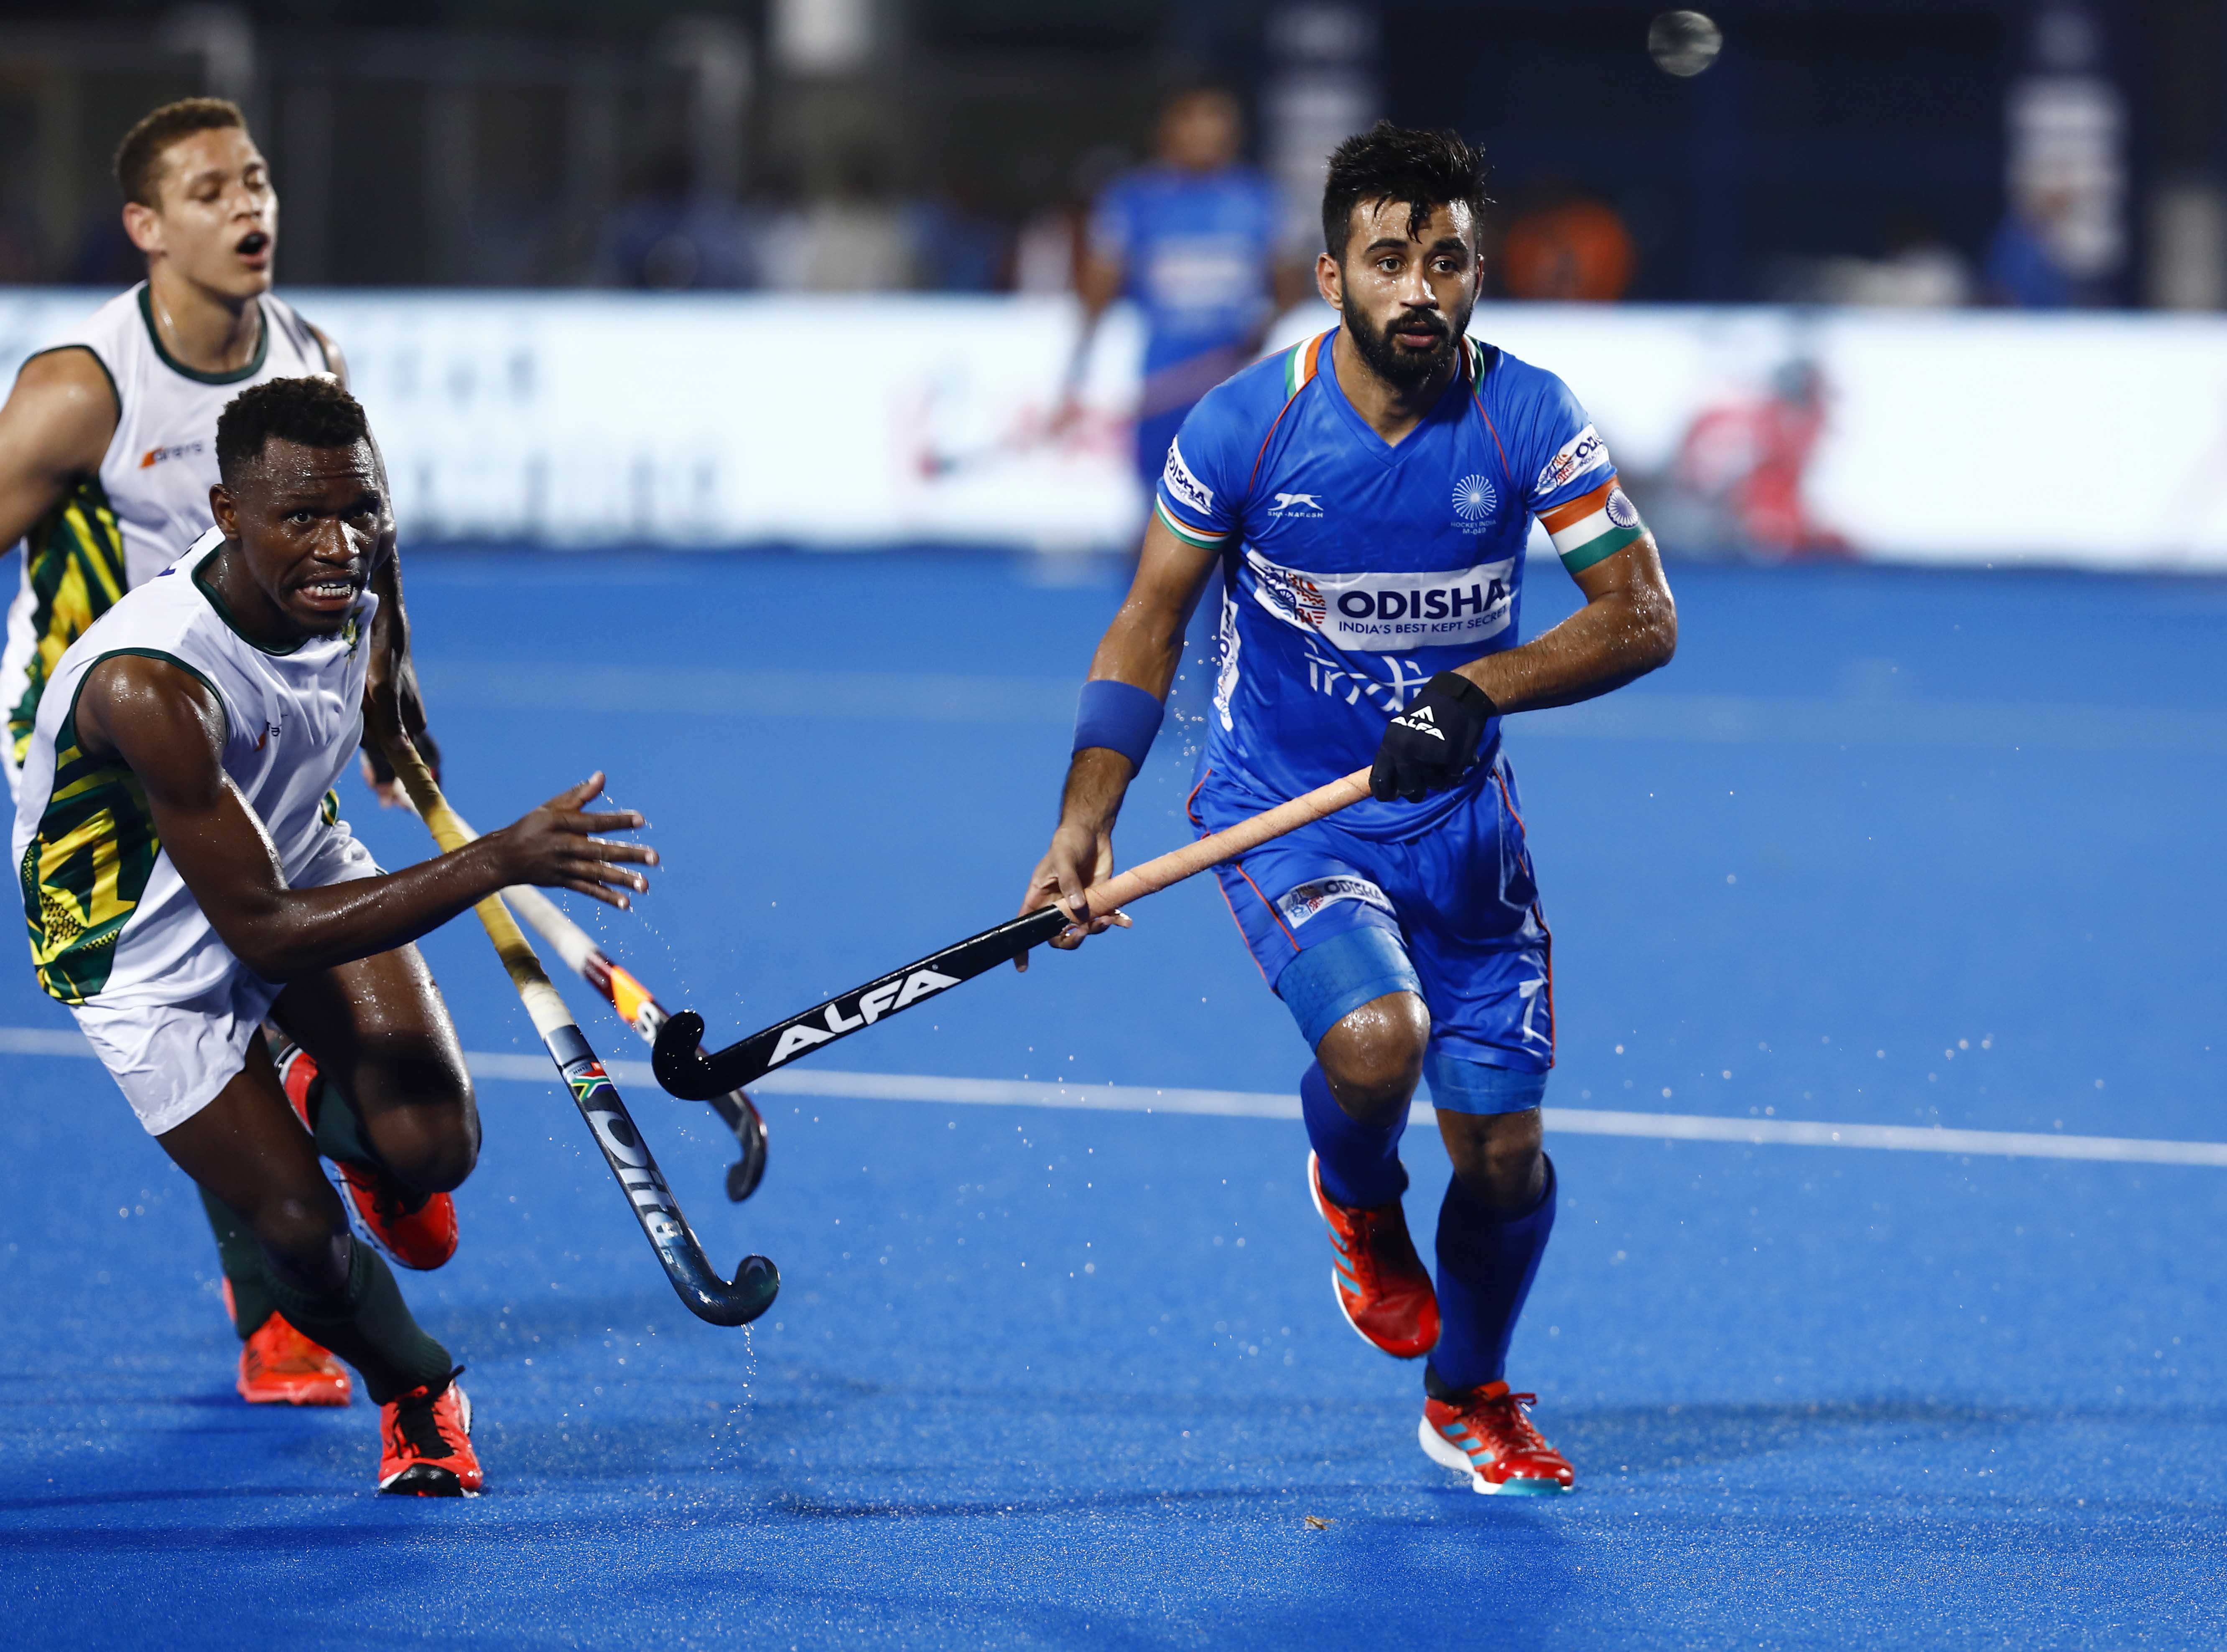 Honours and accolades were overwhelming, but now need to focus on 2022 Asian Games, asserts Manpreet Singh